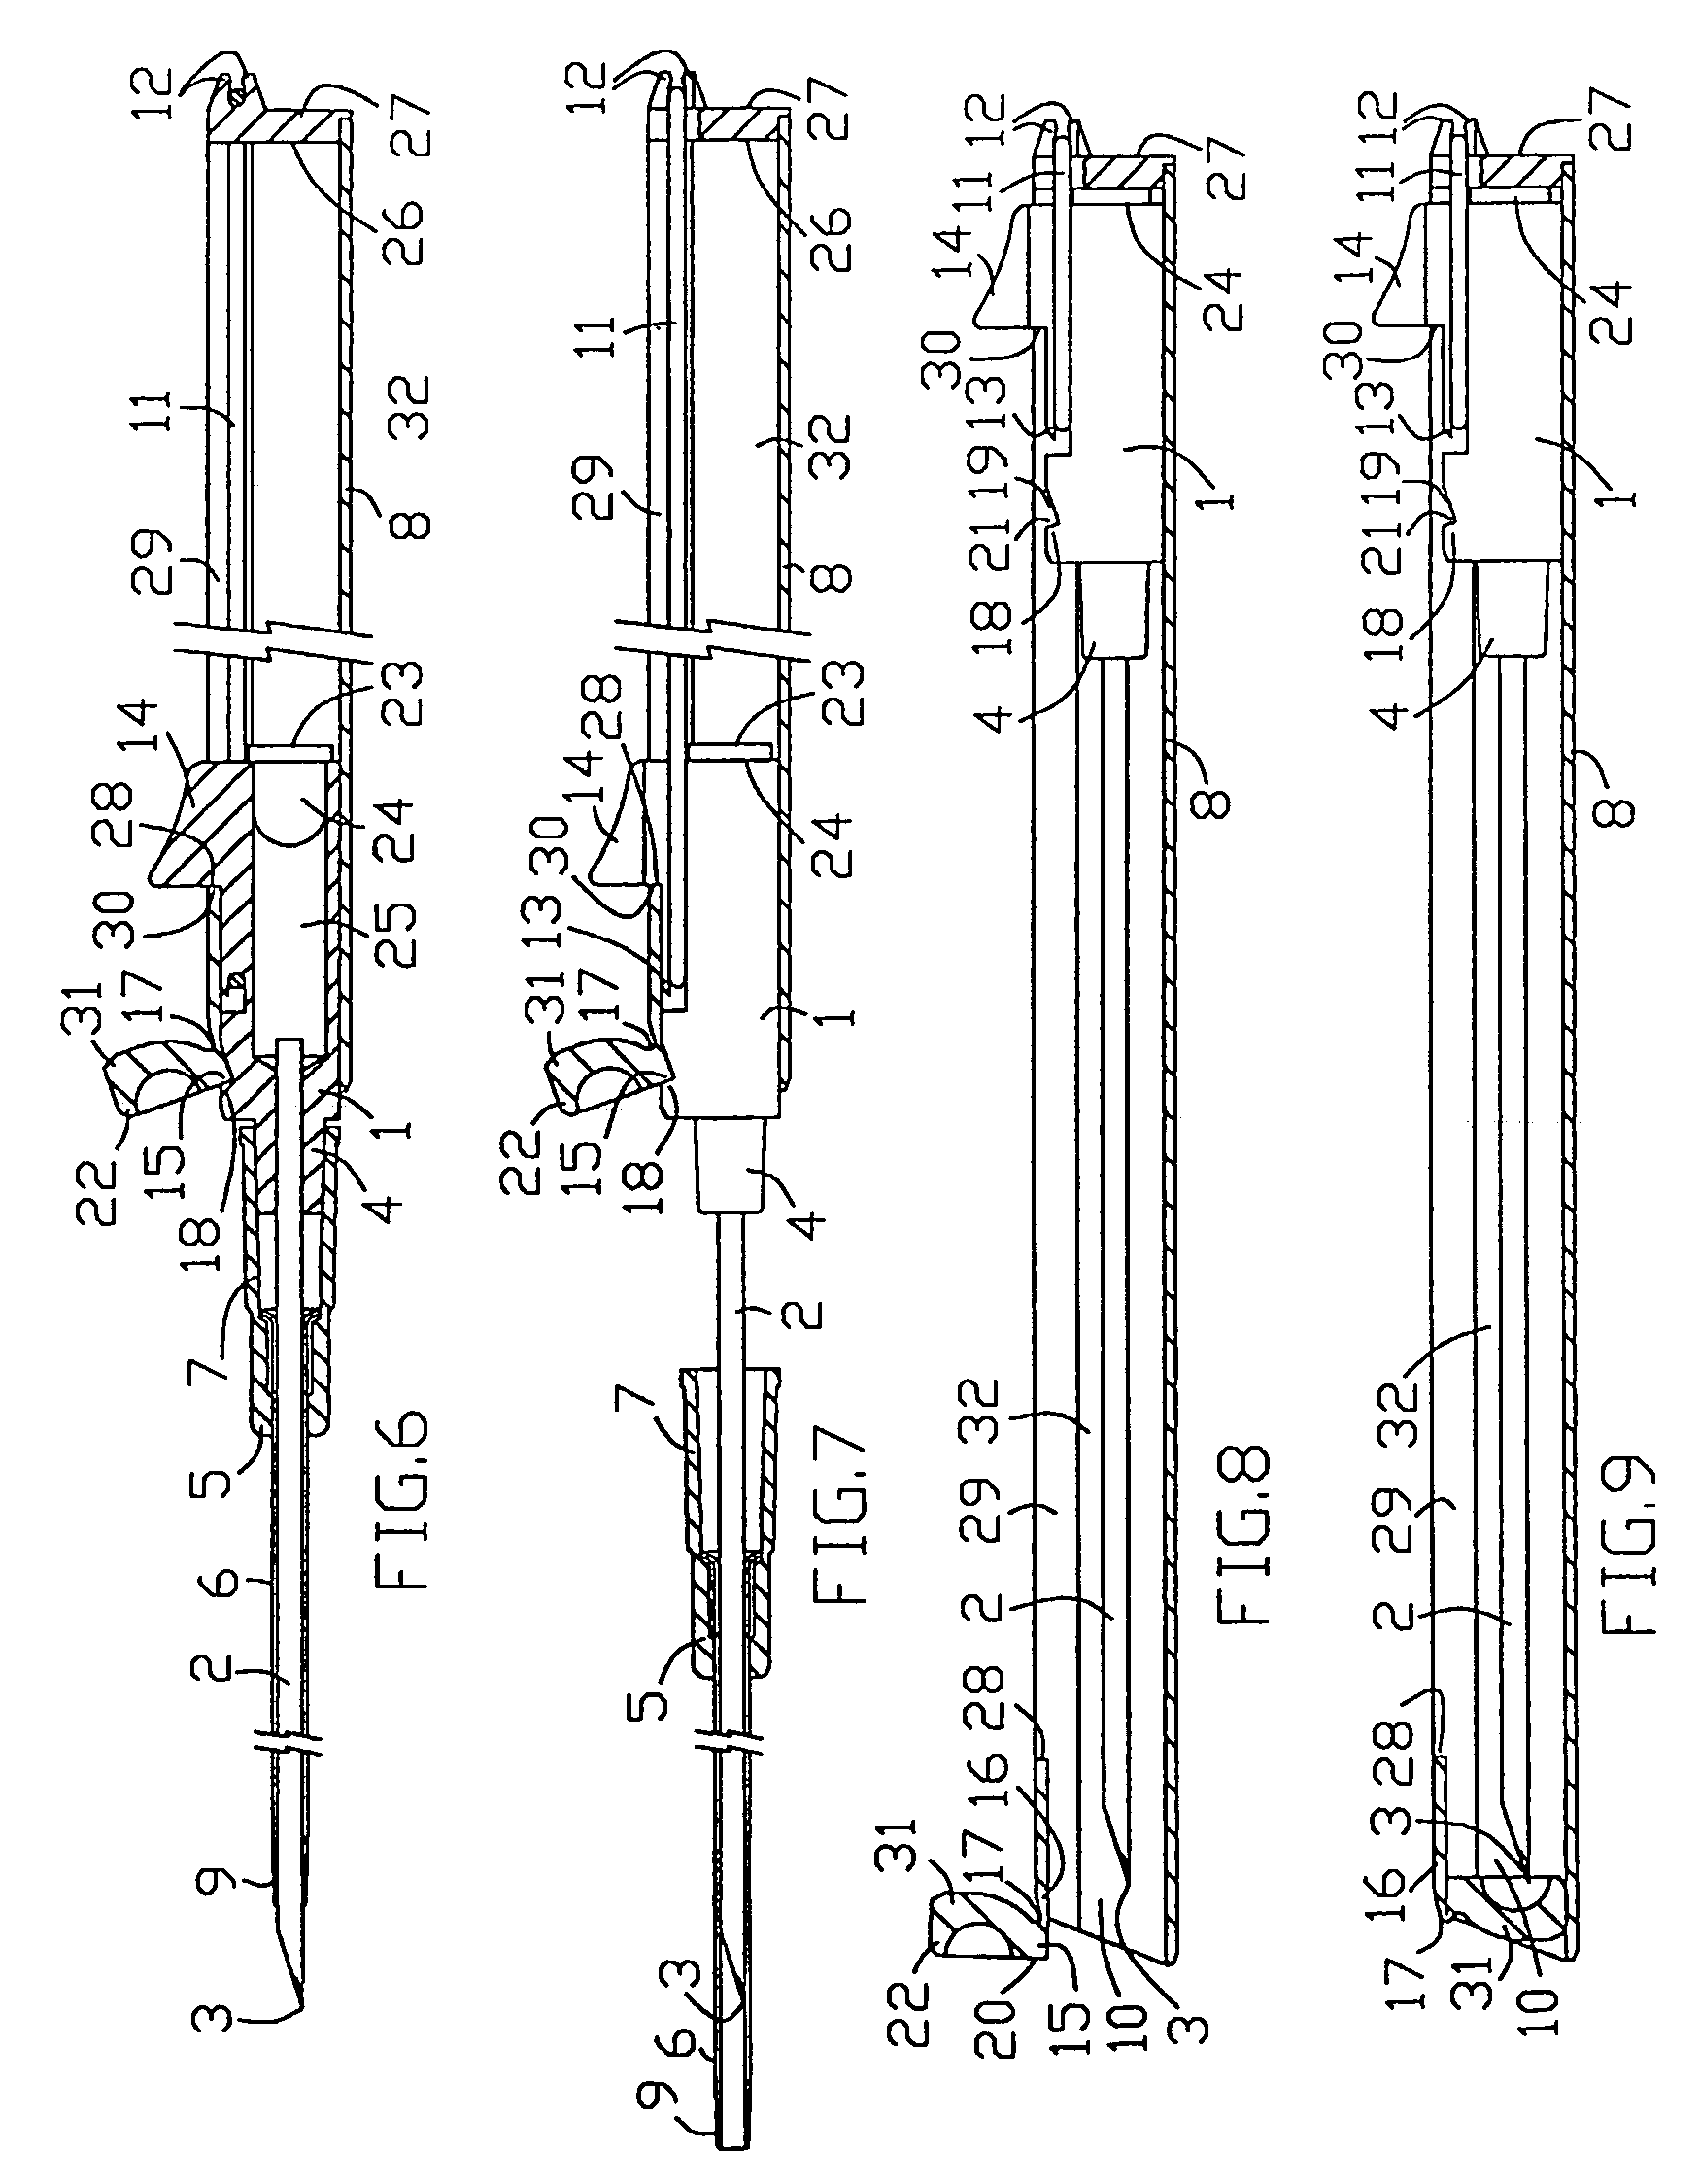 Compact catheter insertion apparatus